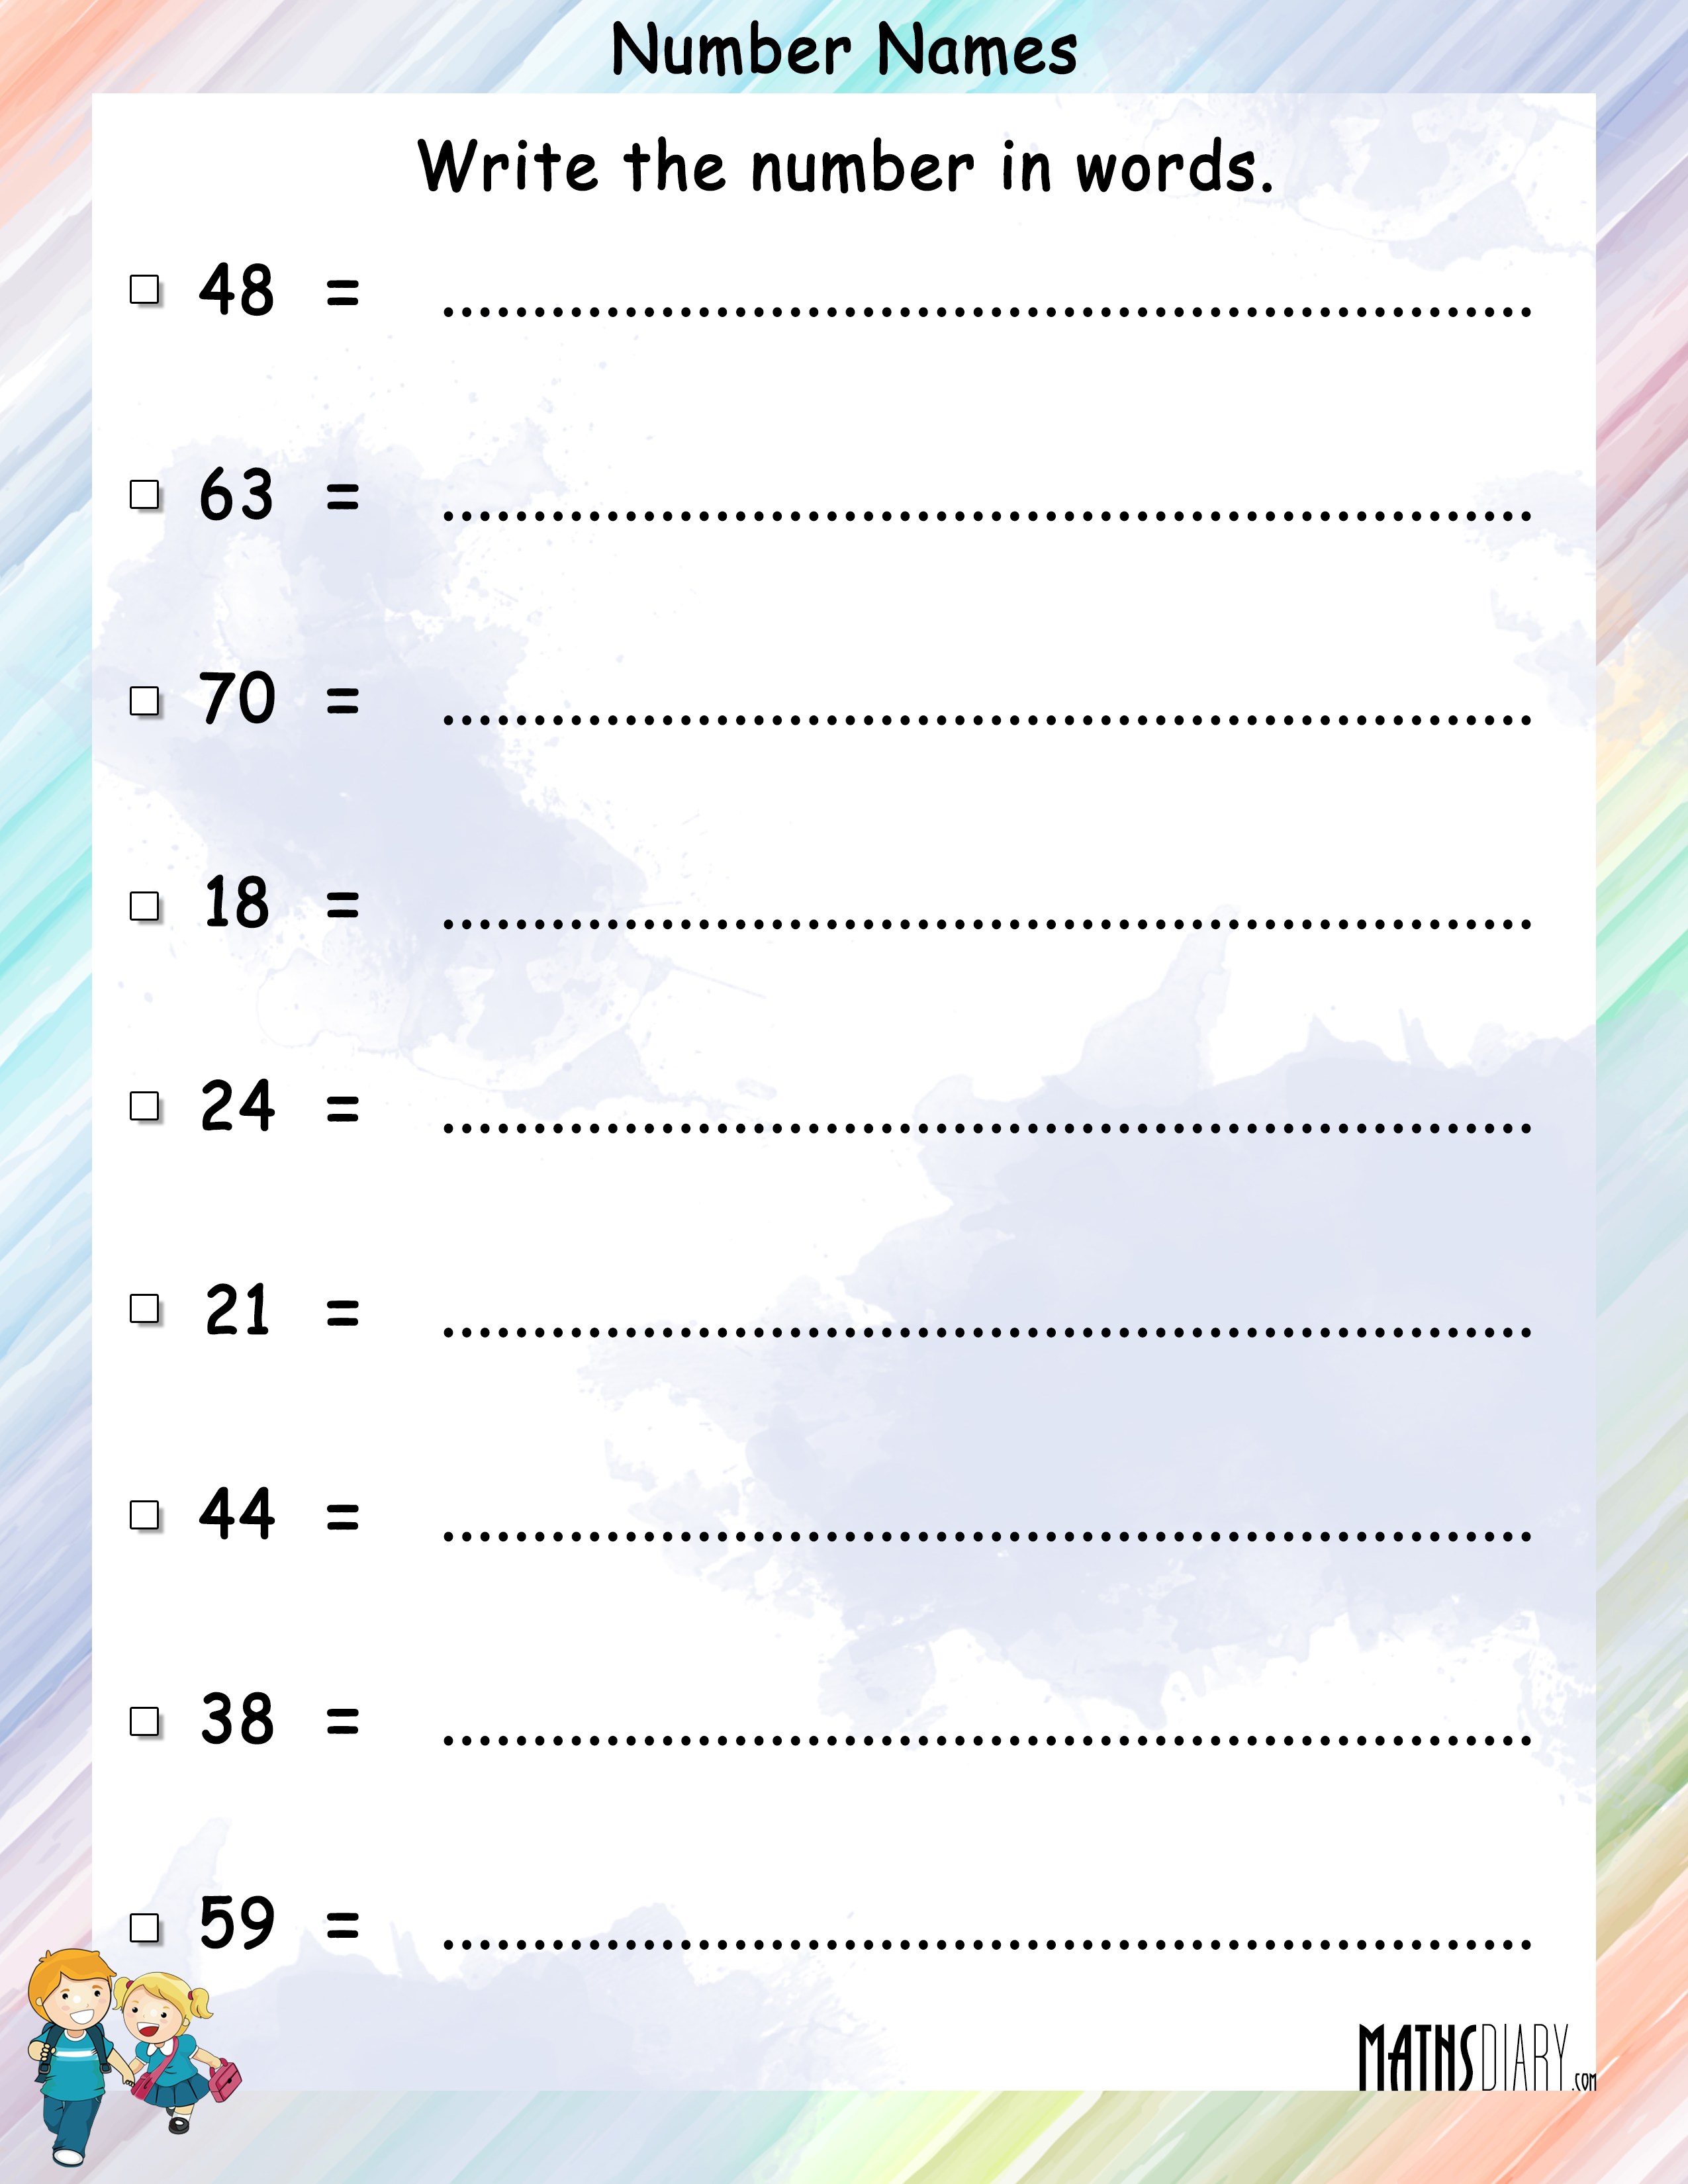 writing-numbers-with-words-worksheet